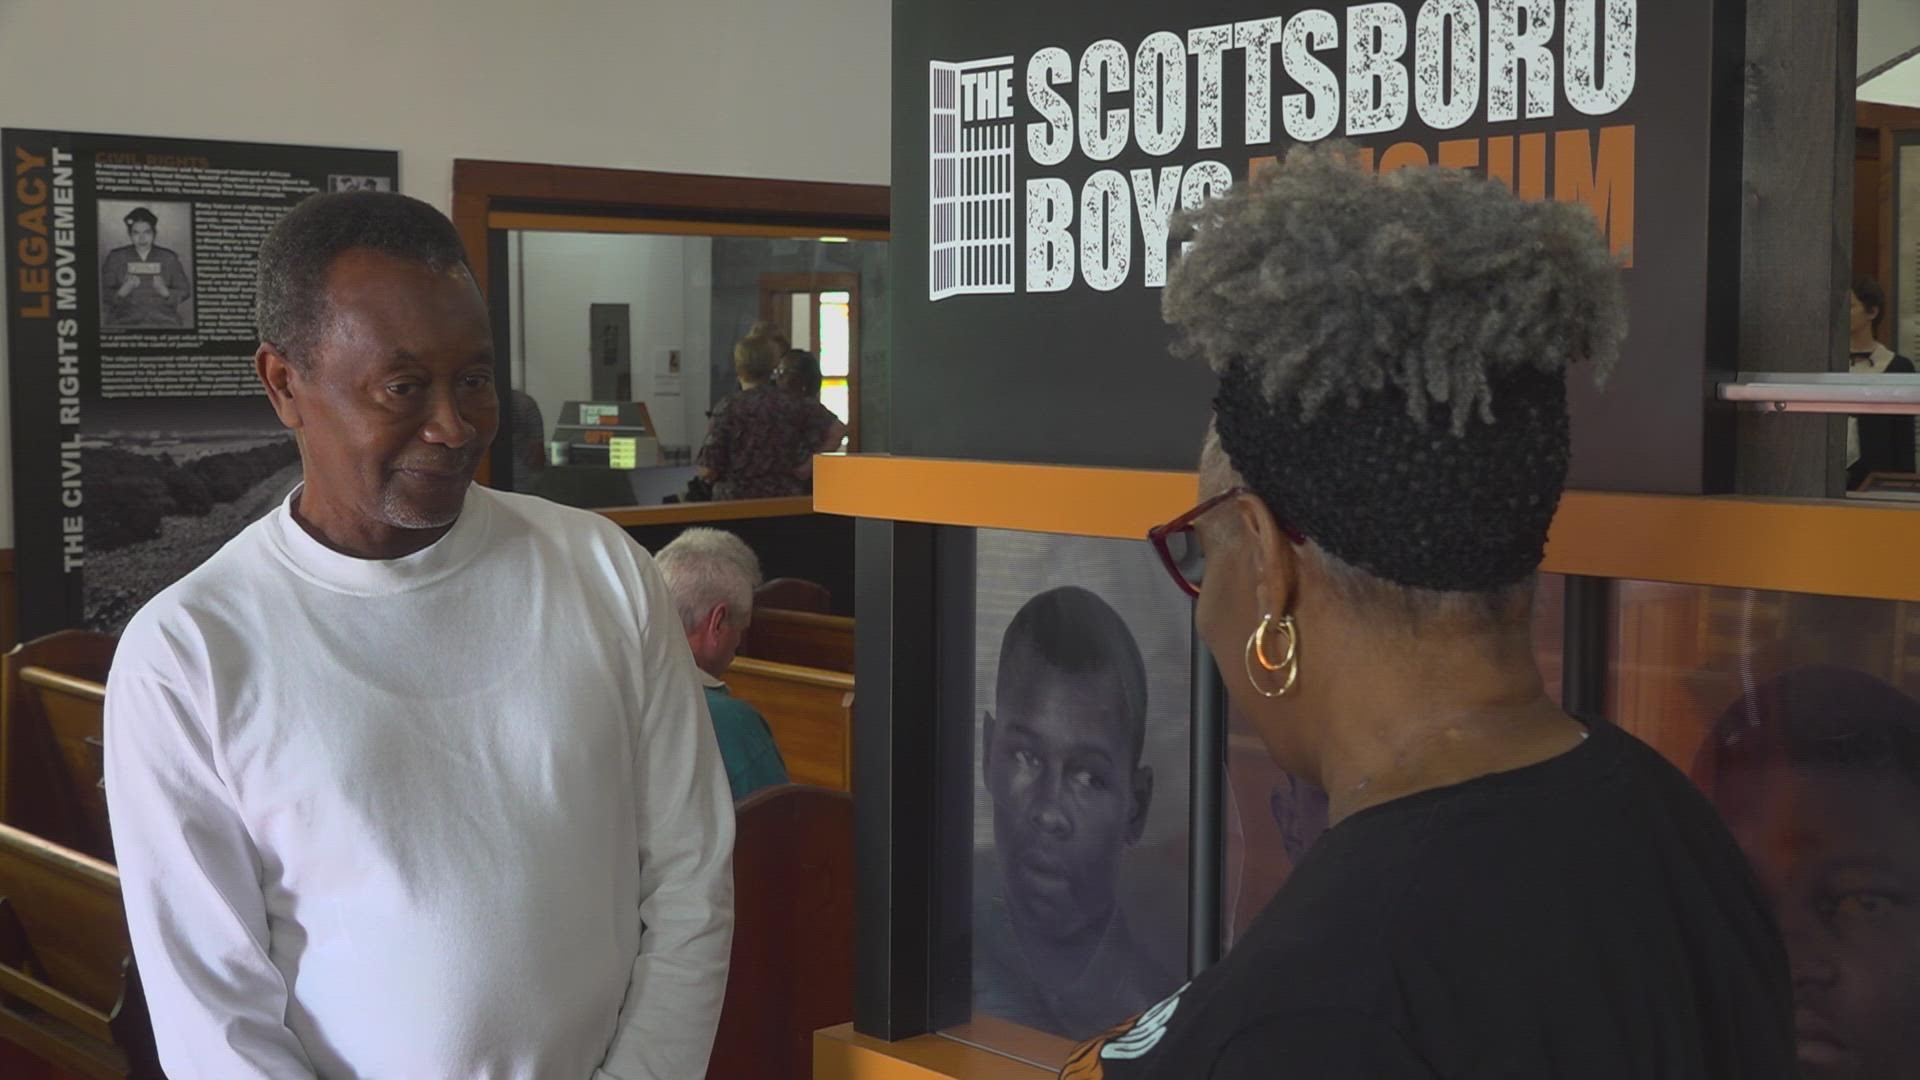 The newly renovated 'Scottsboro Boys Museum' is once again open to the public since 2020. They hope to advance healing, reconciliation and promote civil rights.